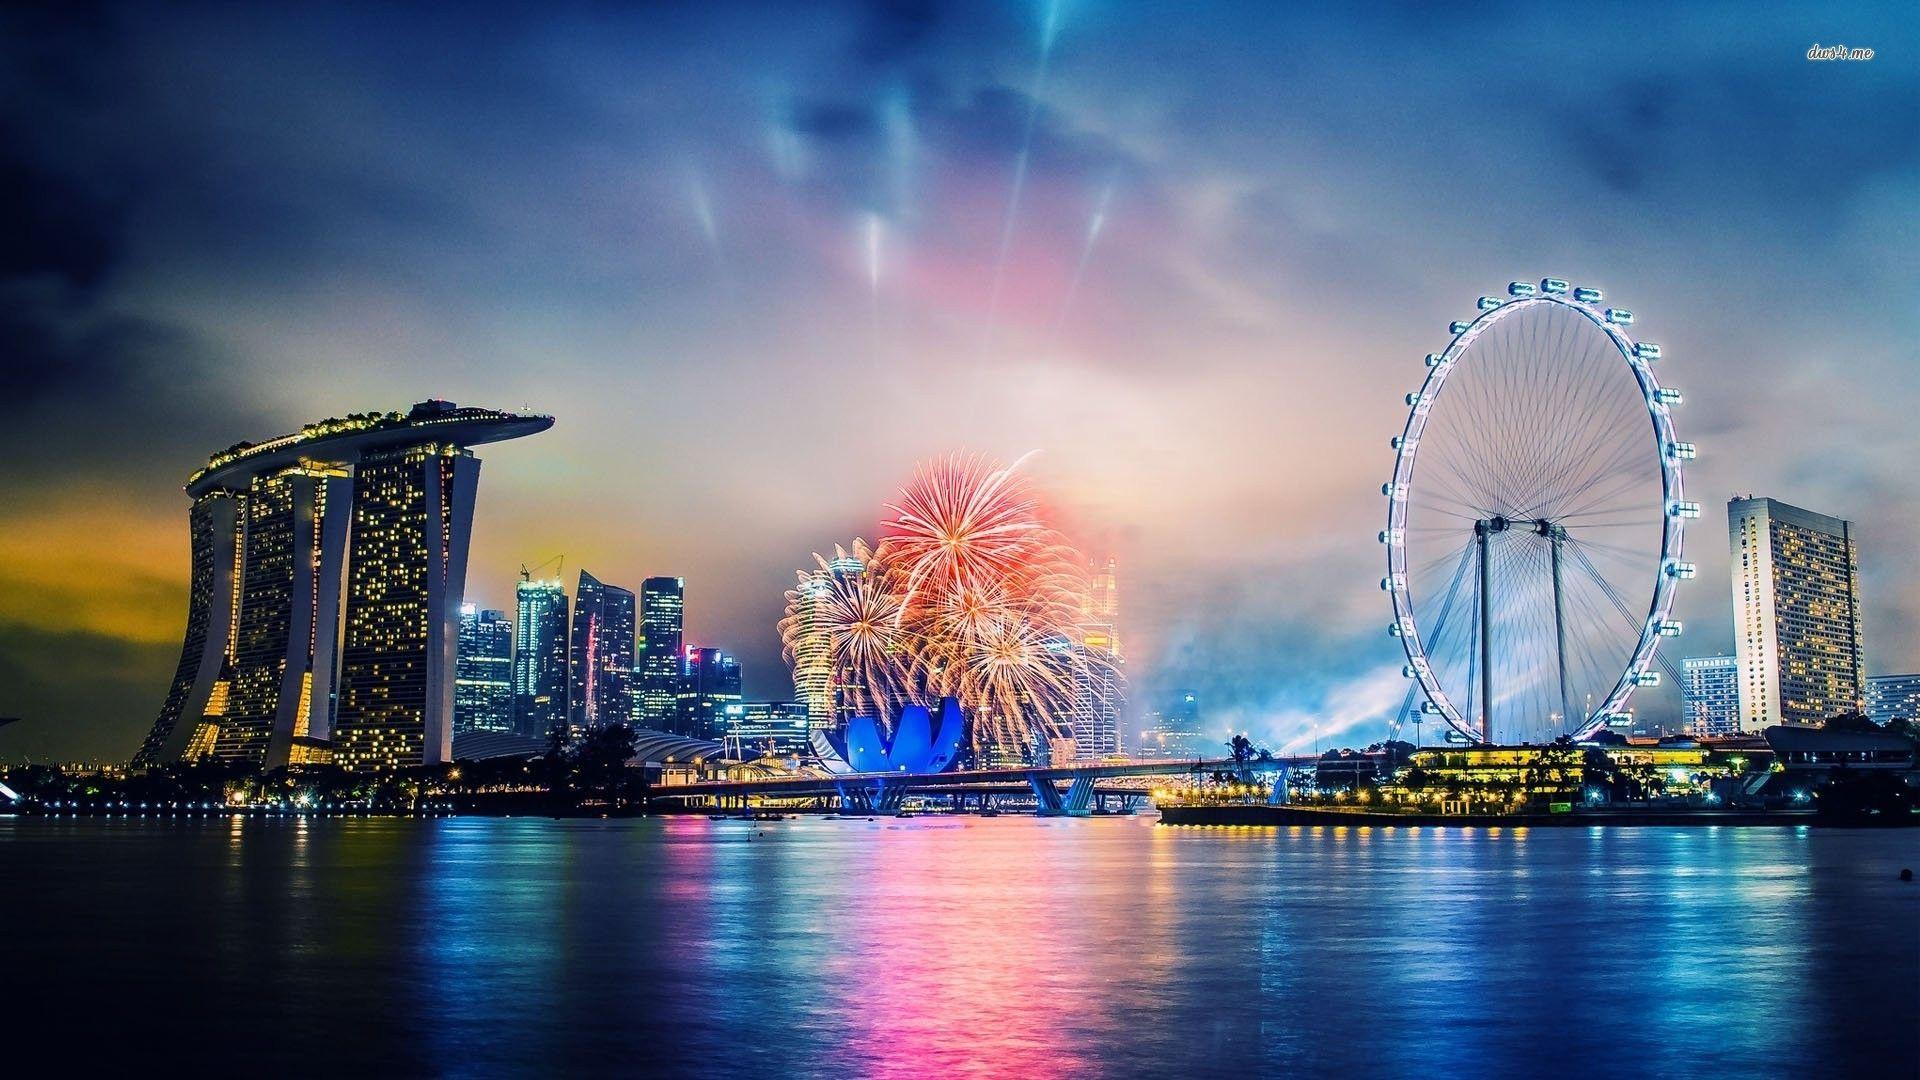 Fireworks over Singapore. #fireworks #singapore. About Singapore